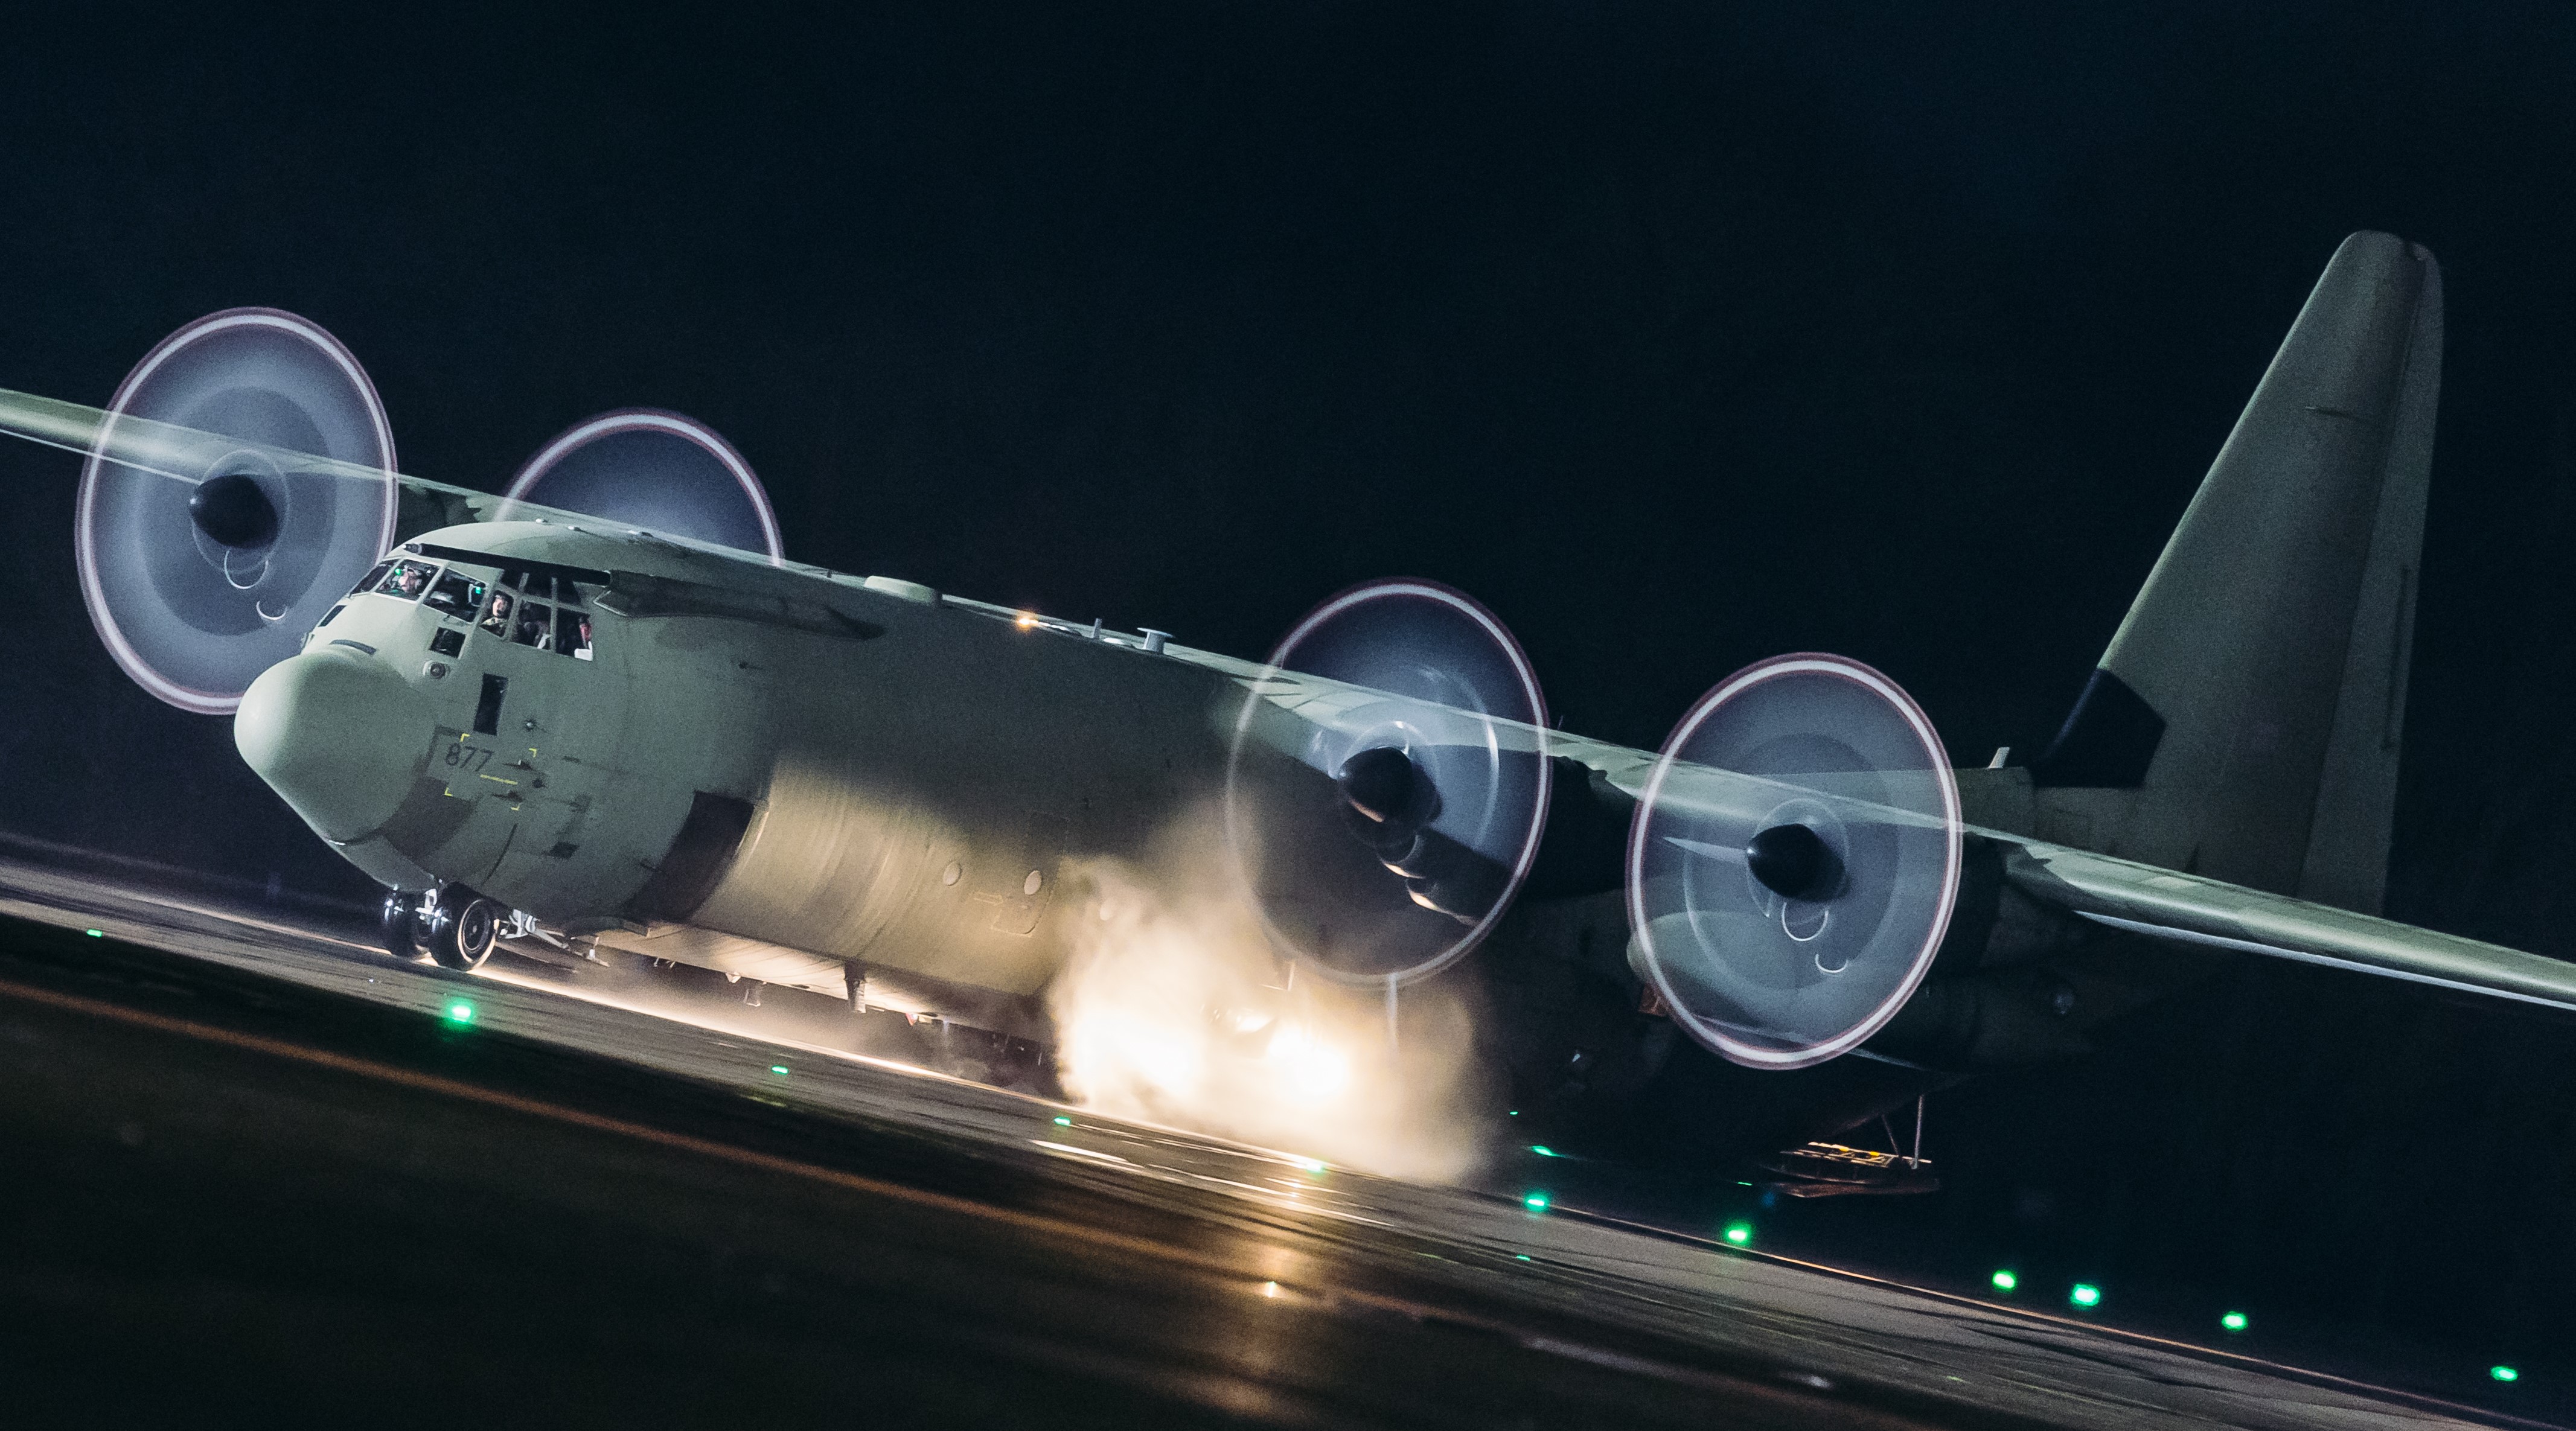 Image shows the RAF Hercules aircraft on the airfield at night.